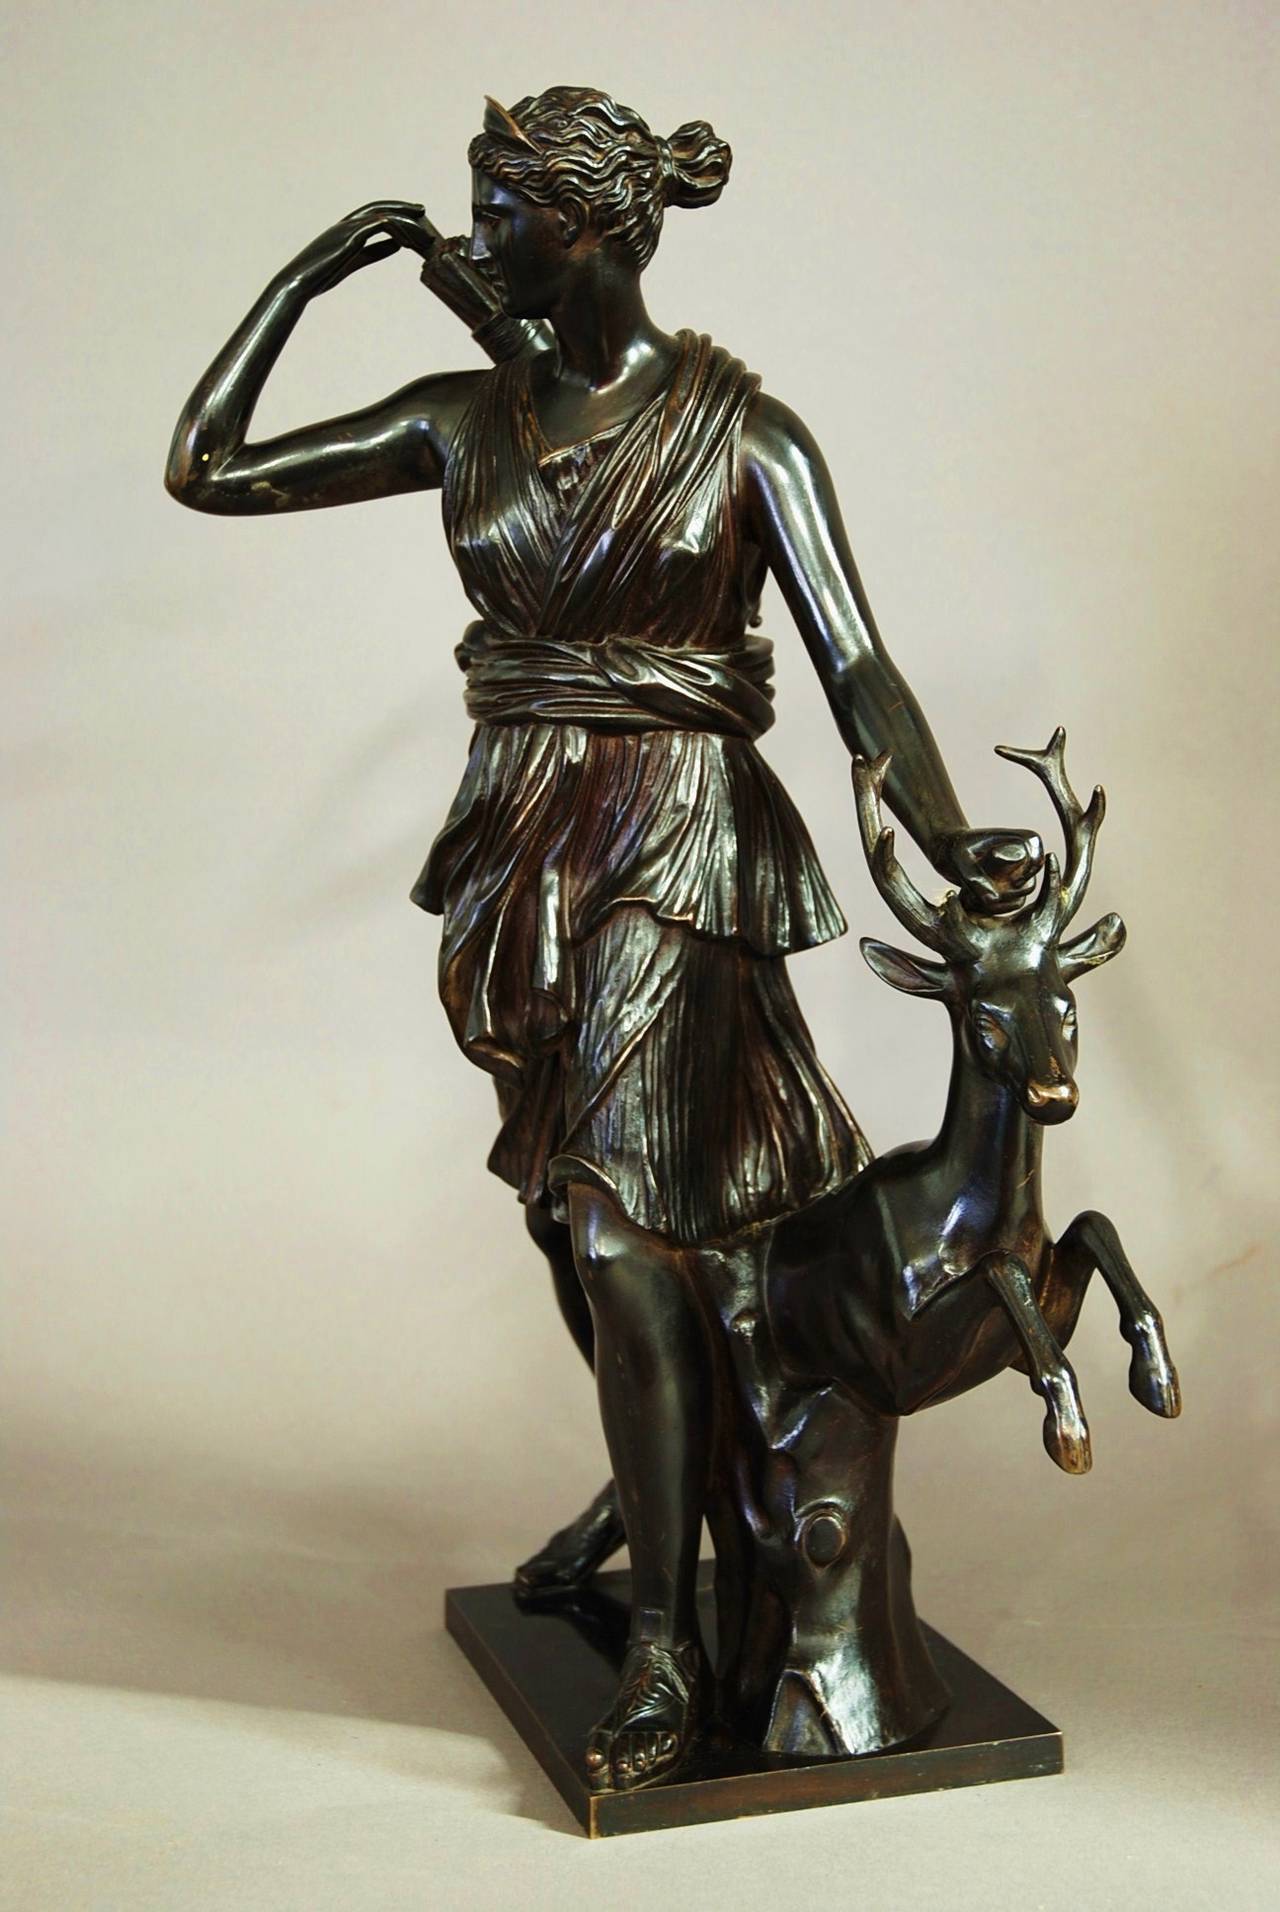 French 19th century bronze figure 'Diana of Versailles' after the antique